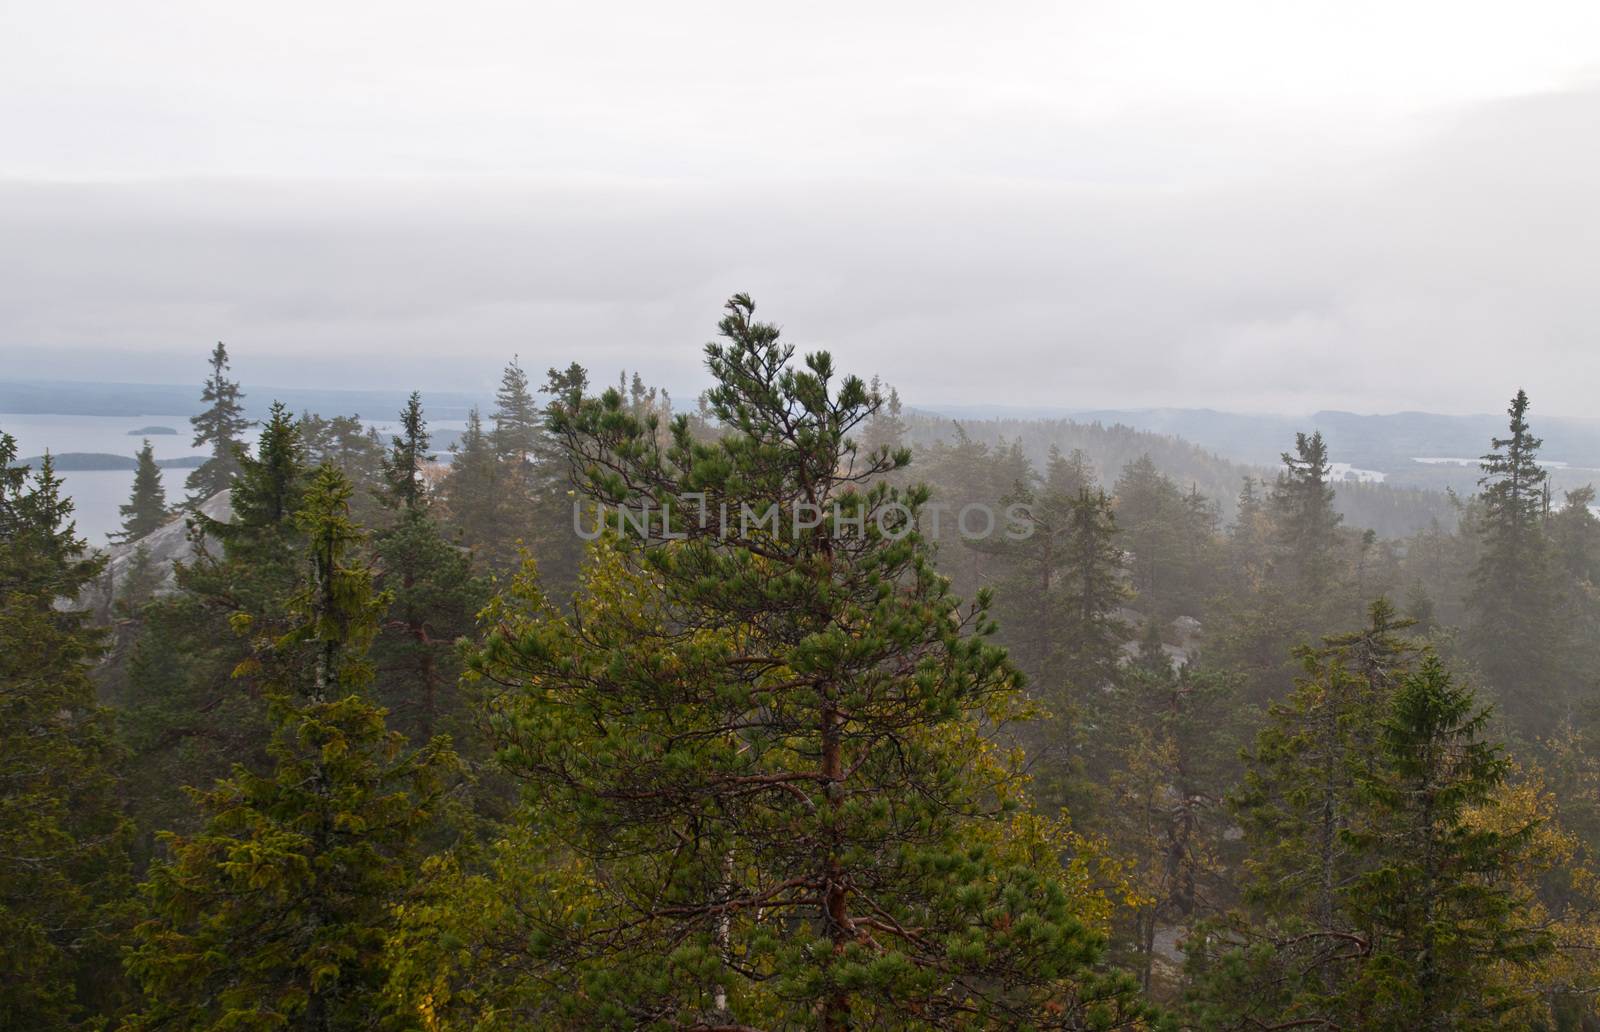 Pine forest in the region of North-Karelia, Finland